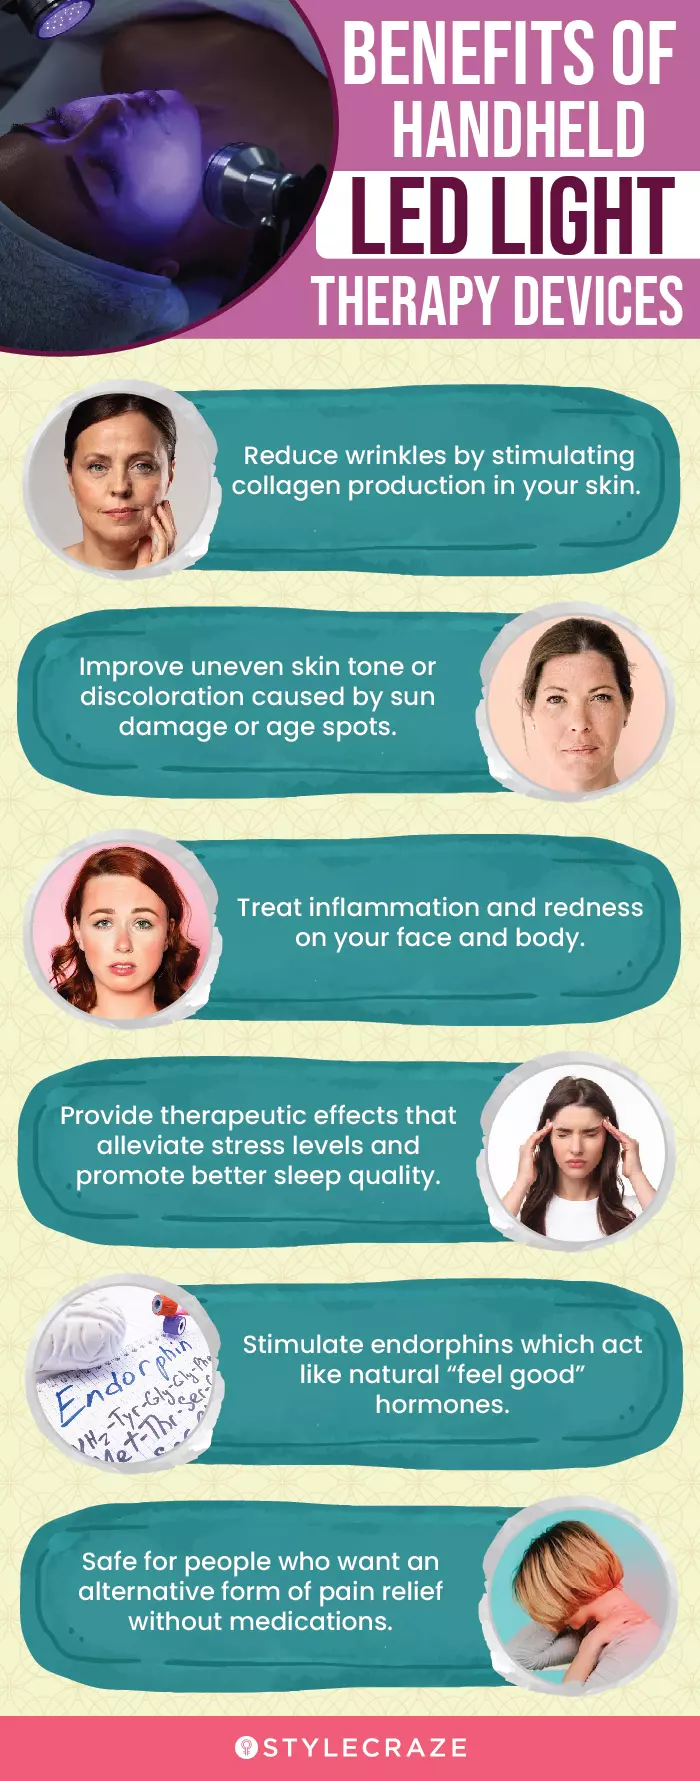 Benefits Of Handheld LED Light Therapy Devices (infographic)